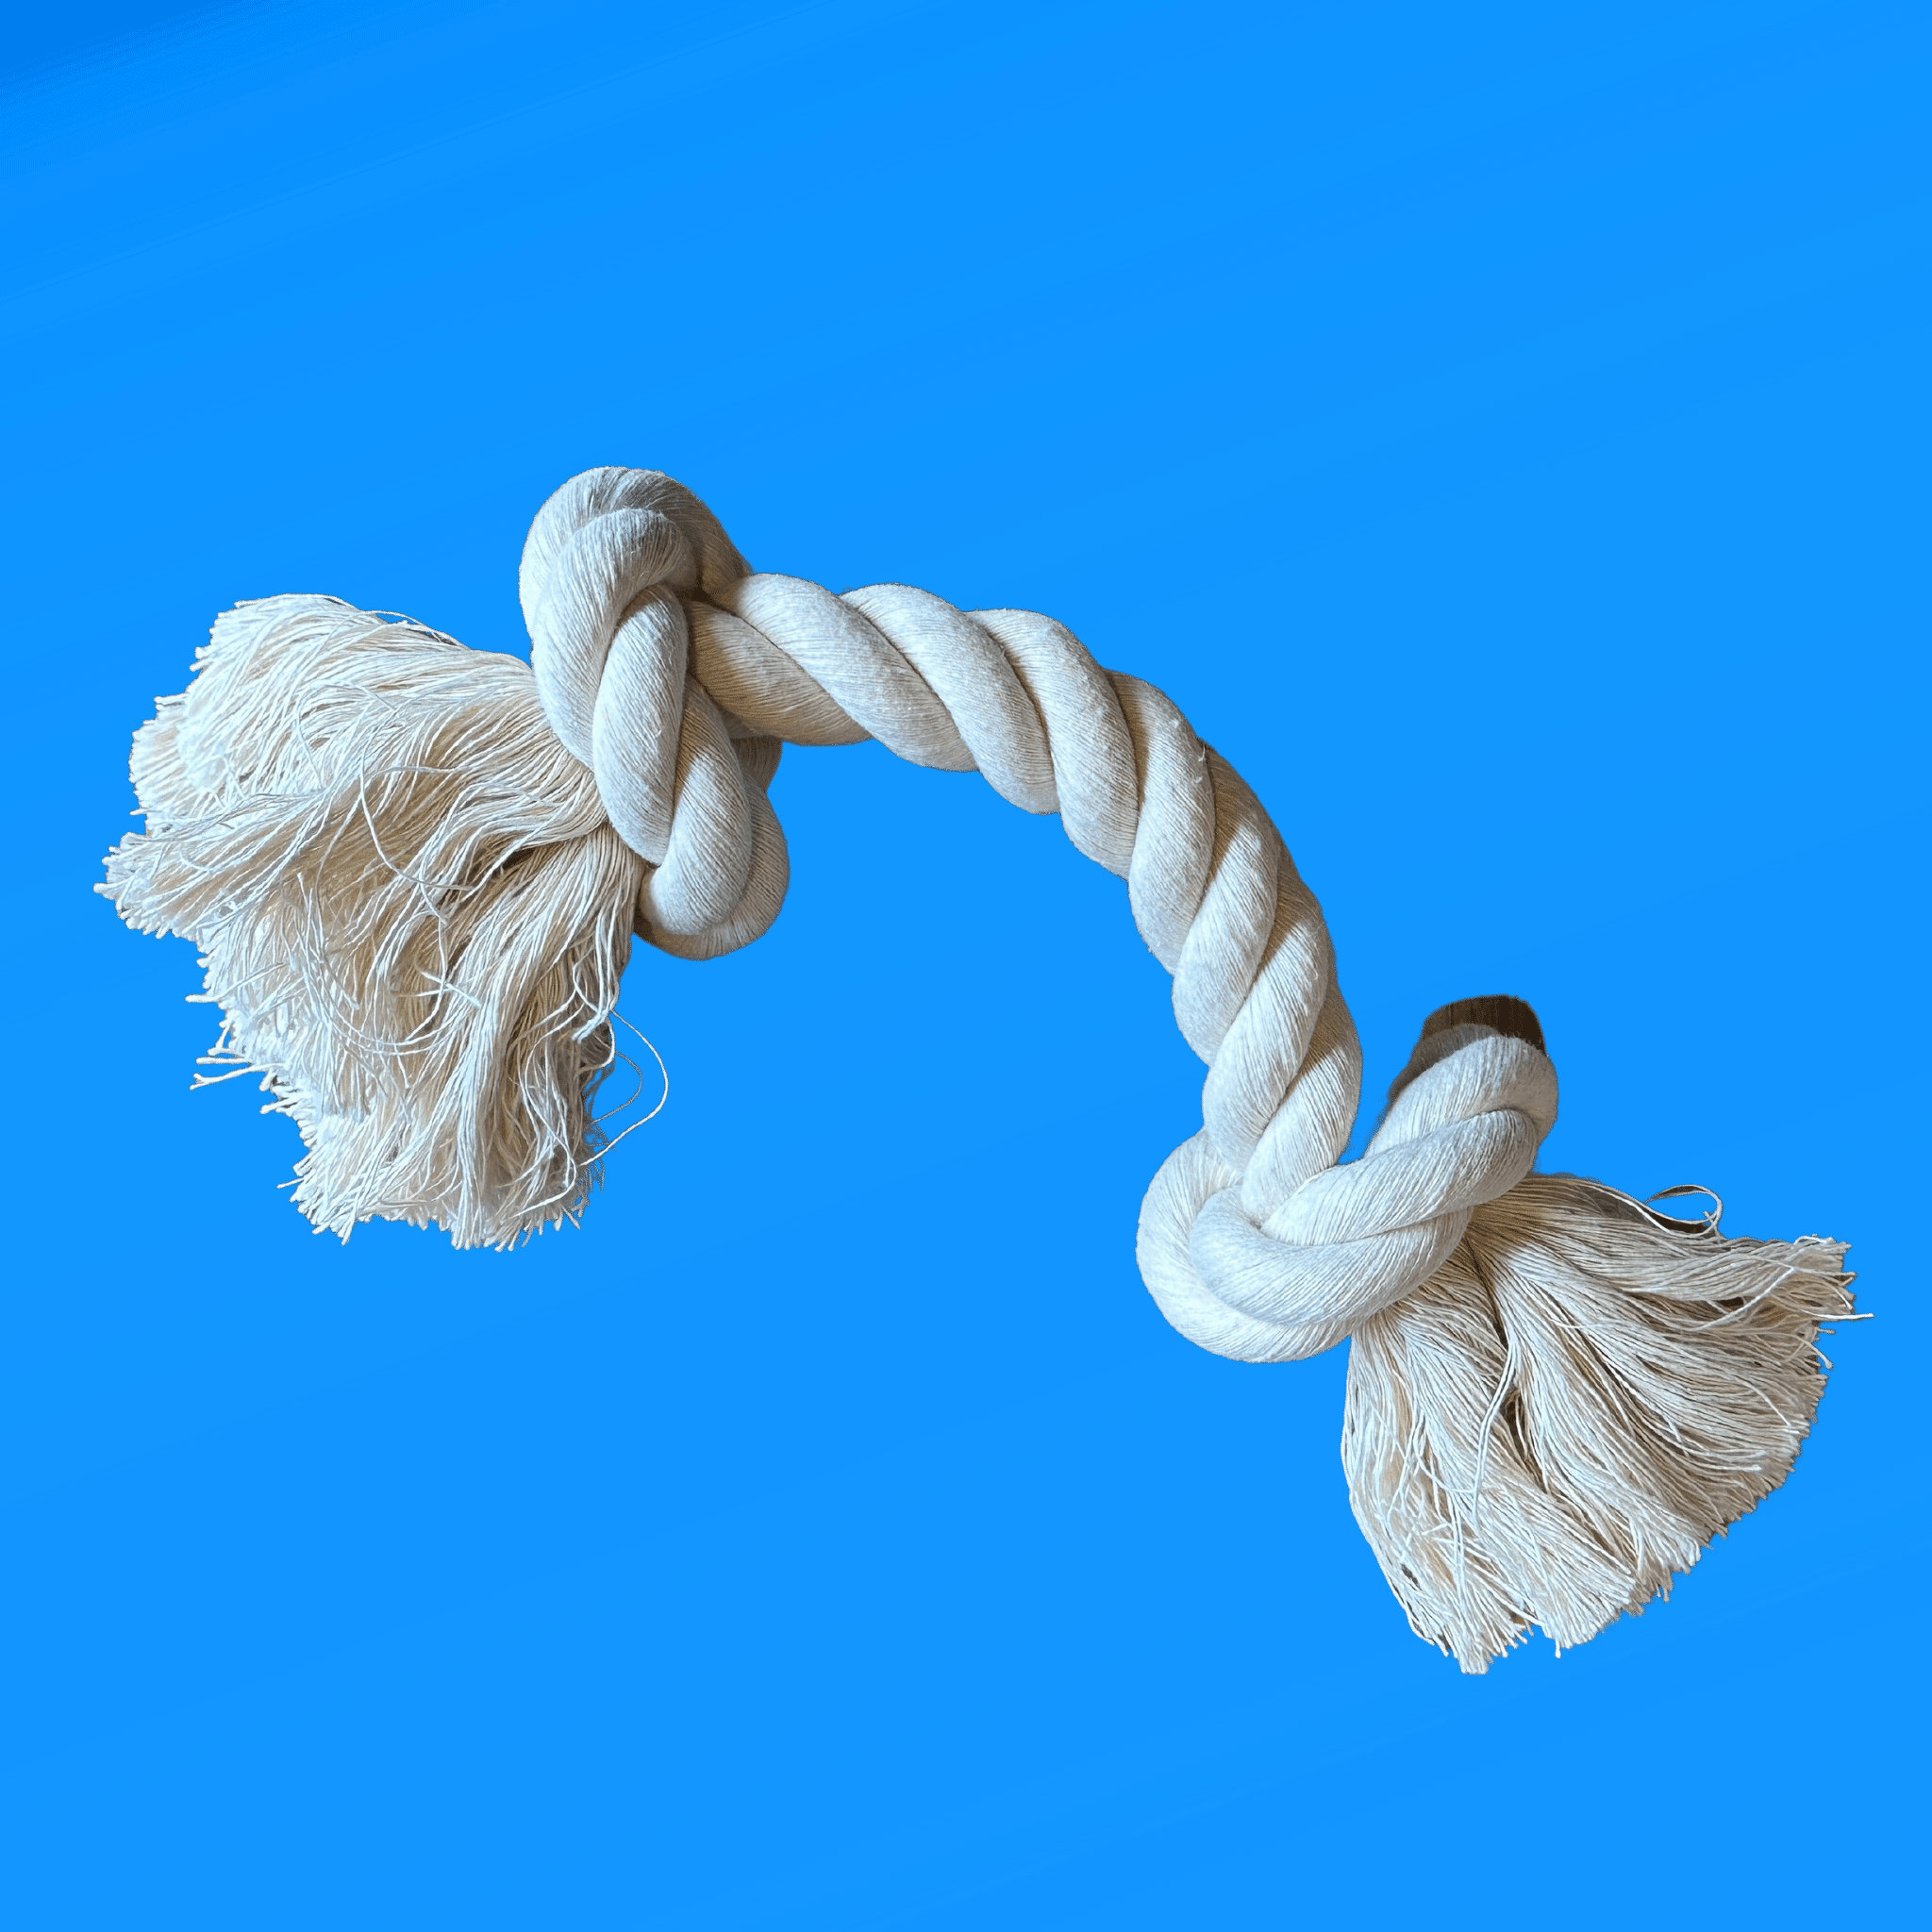 OTTER® Natural Hemp Rope Dog Toys. Handcrafted in USA – Otter®